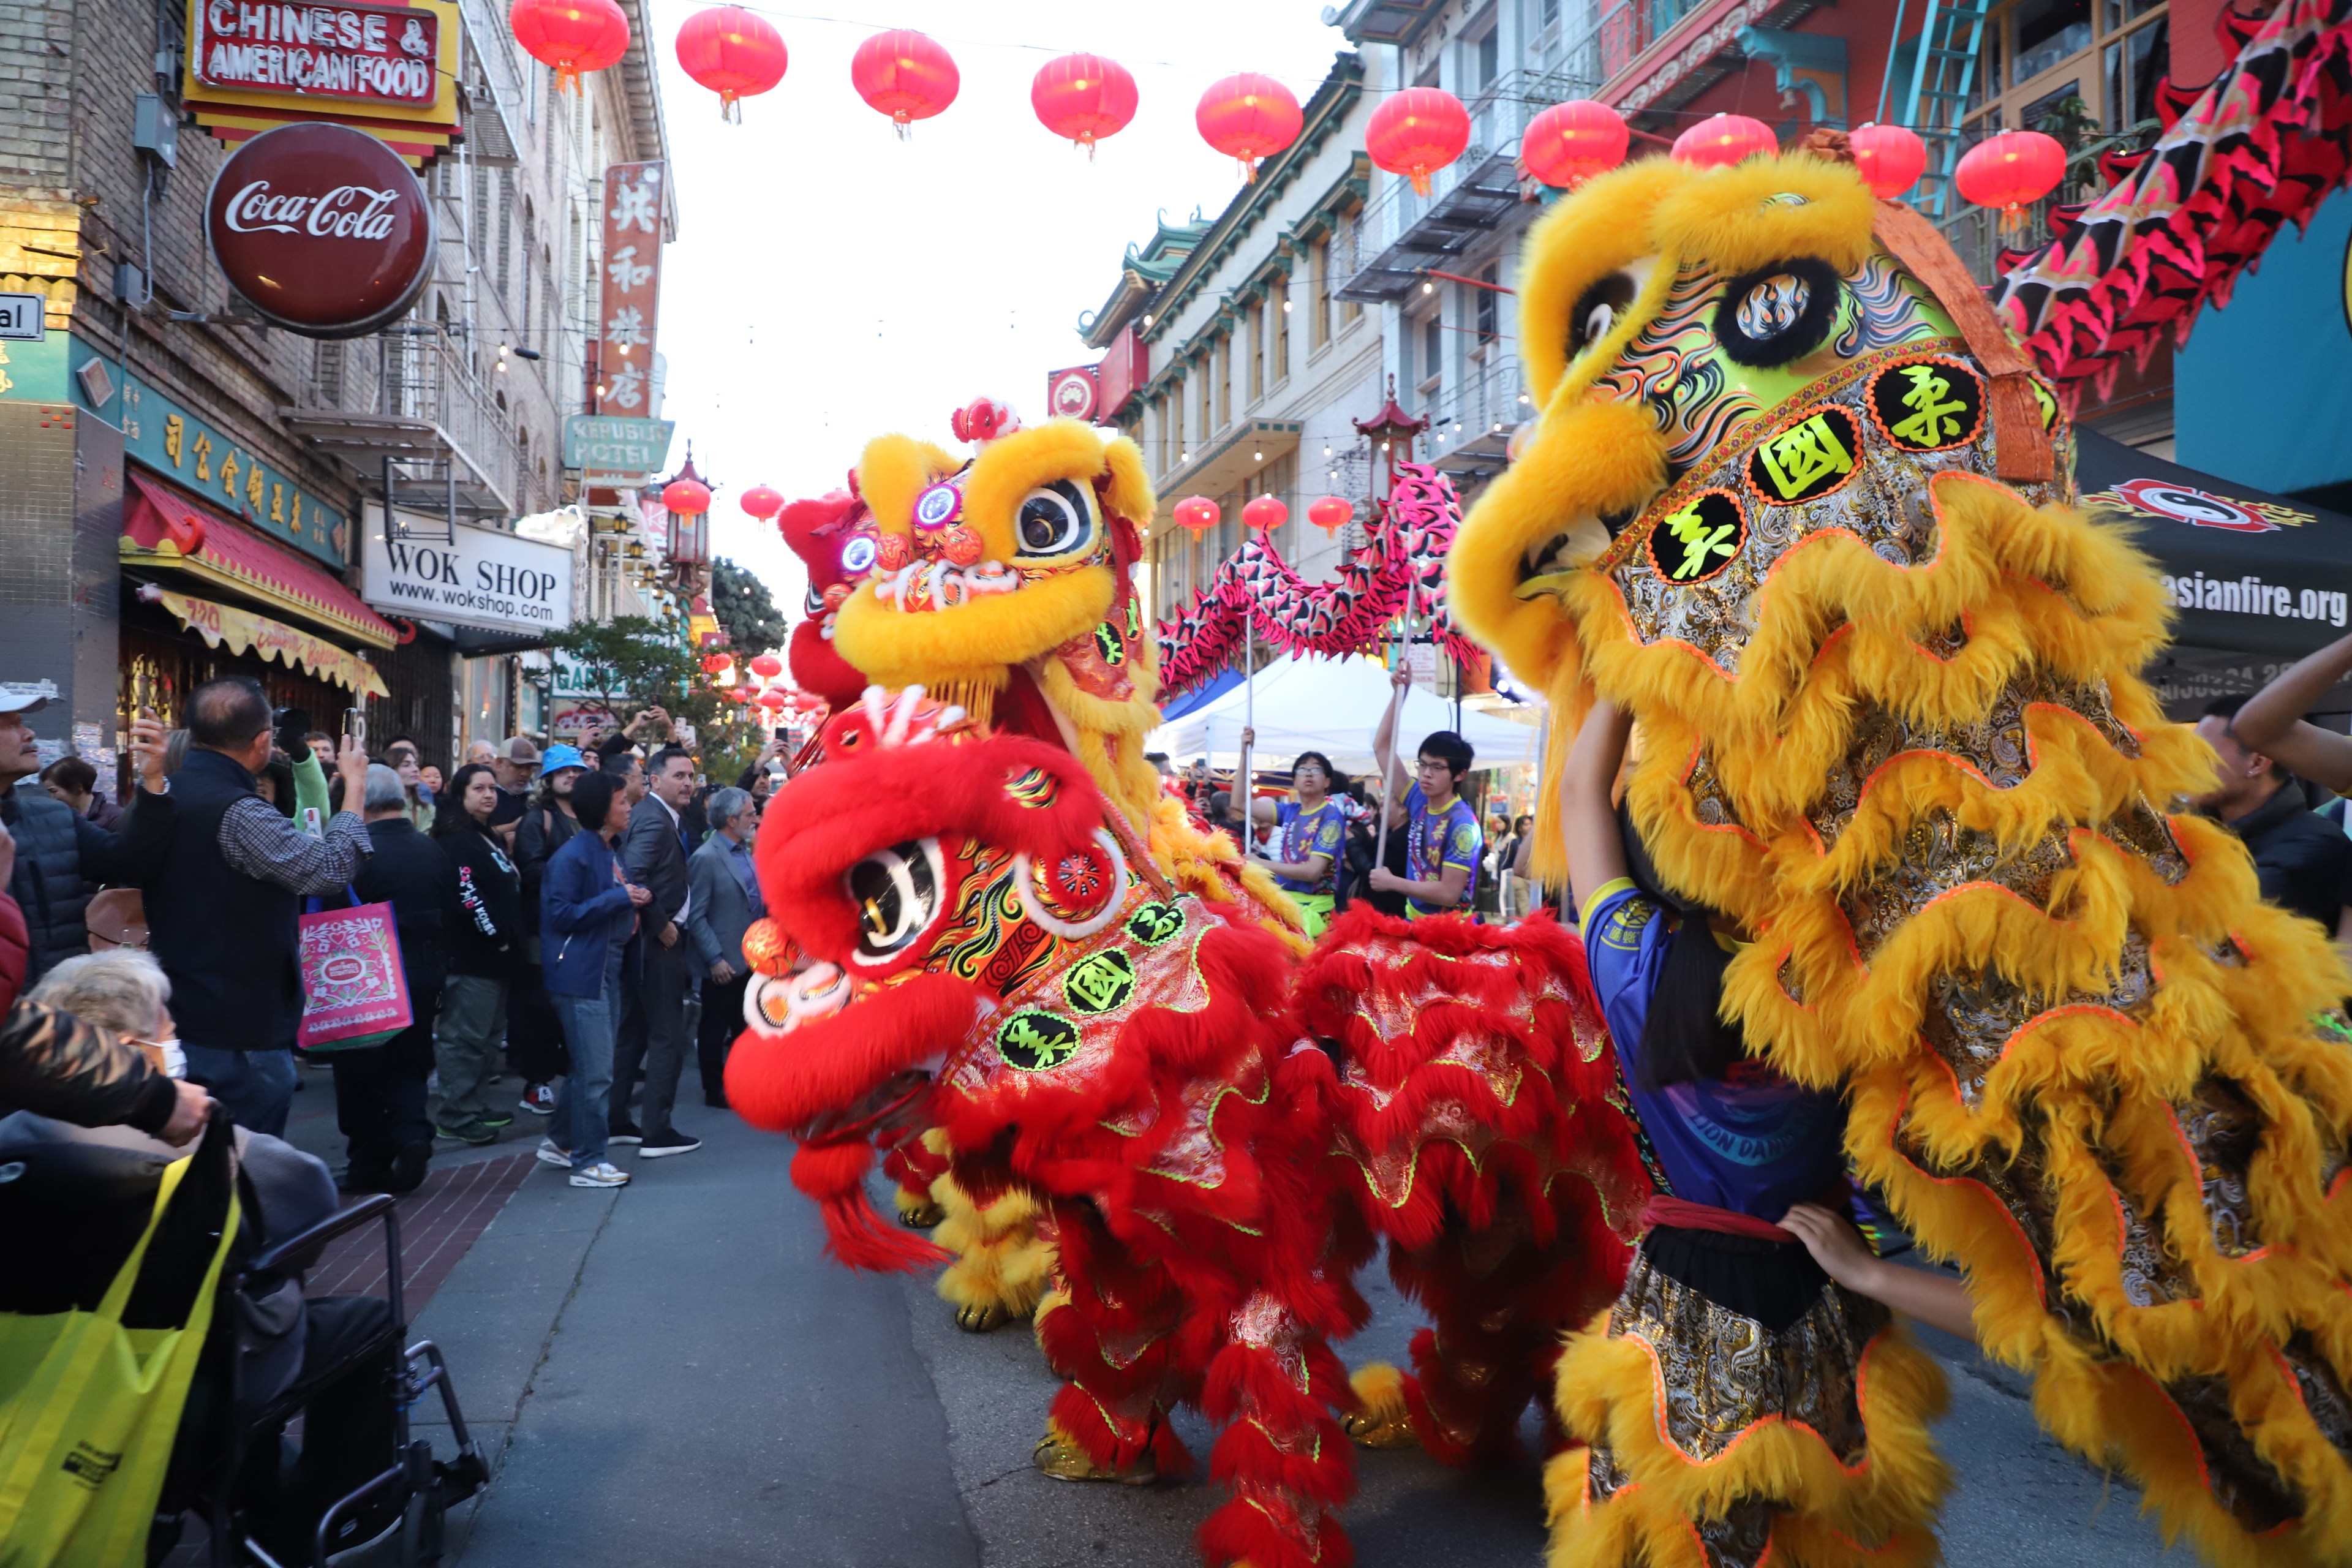 Two vibrant lion dance costumes perform in a bustling street with red lanterns and onlookers.